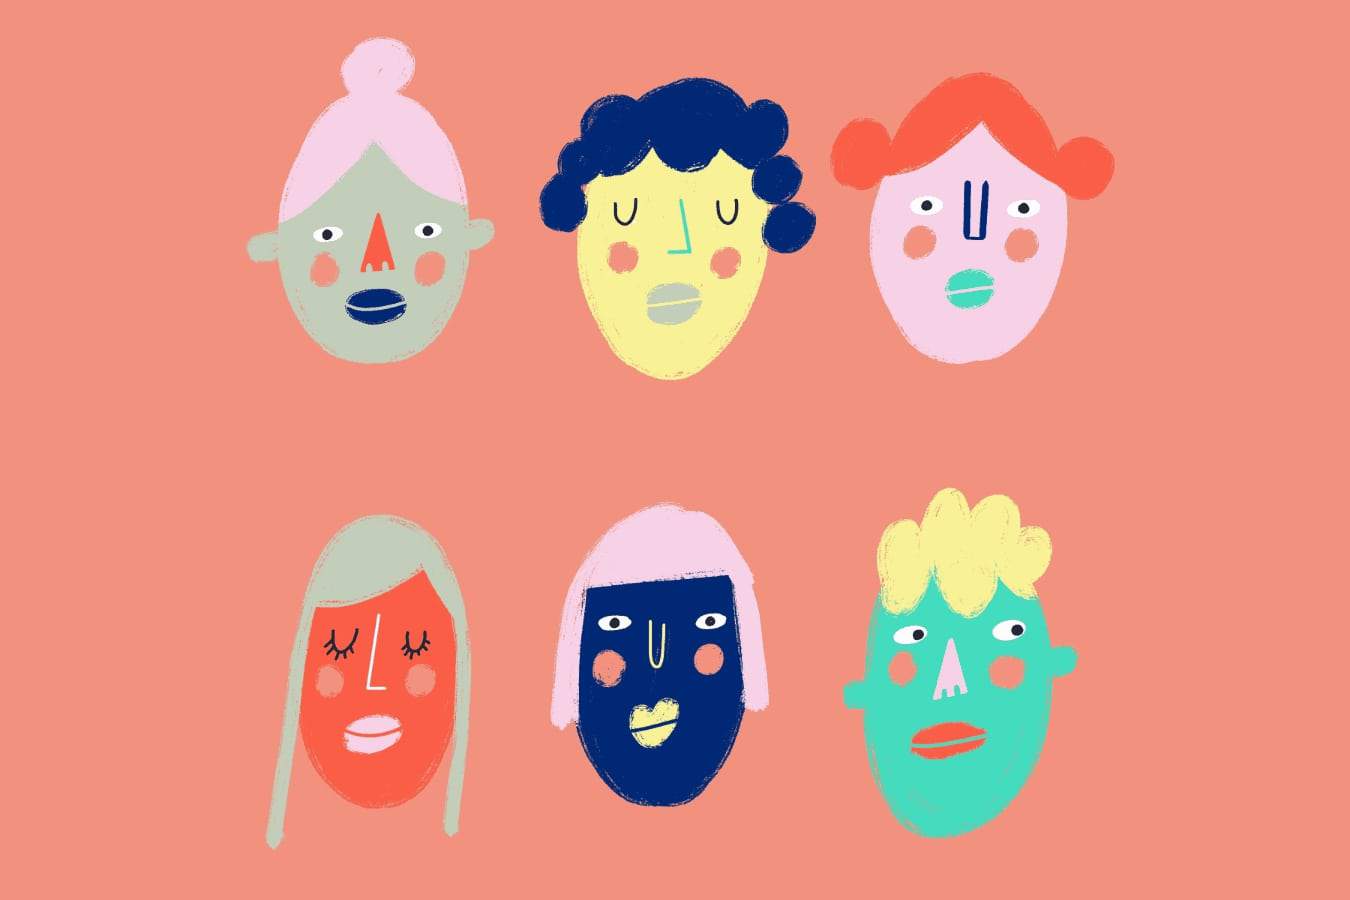 Colorful faces illustrated.